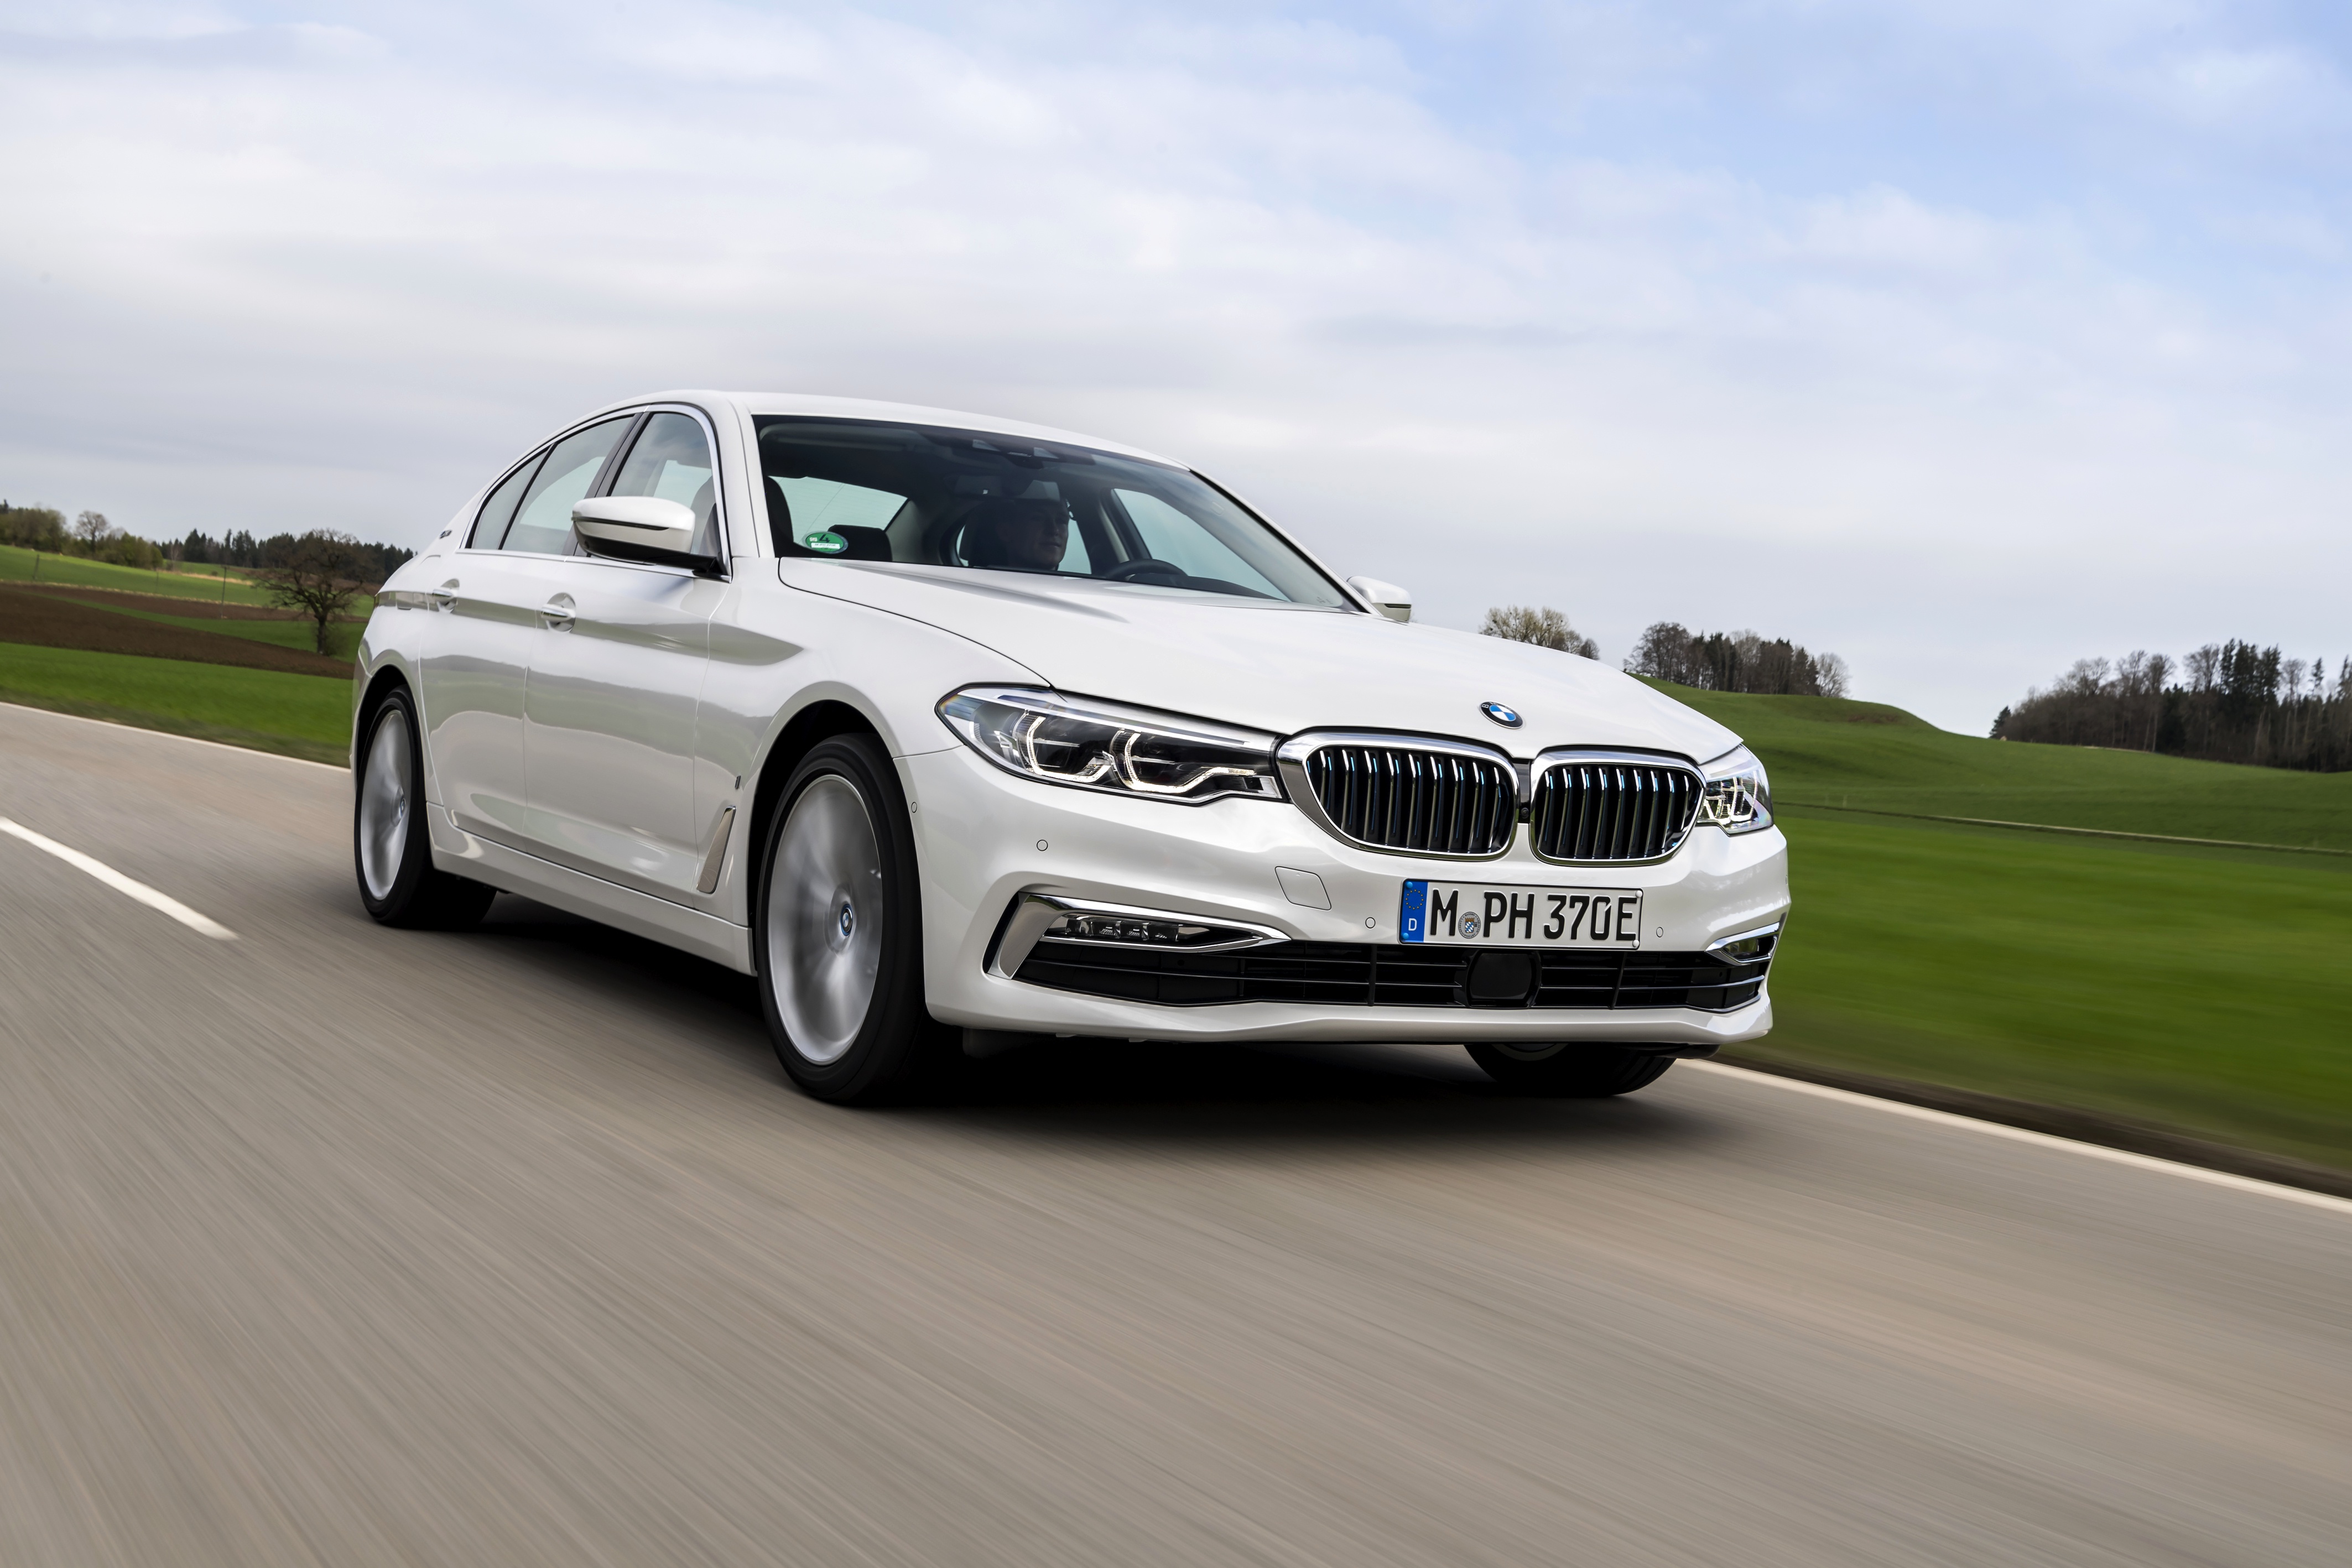 BMW 5 Series Price in India 2021 BMW 5 Series facelift launched at Rs 629  lakh   Times of India